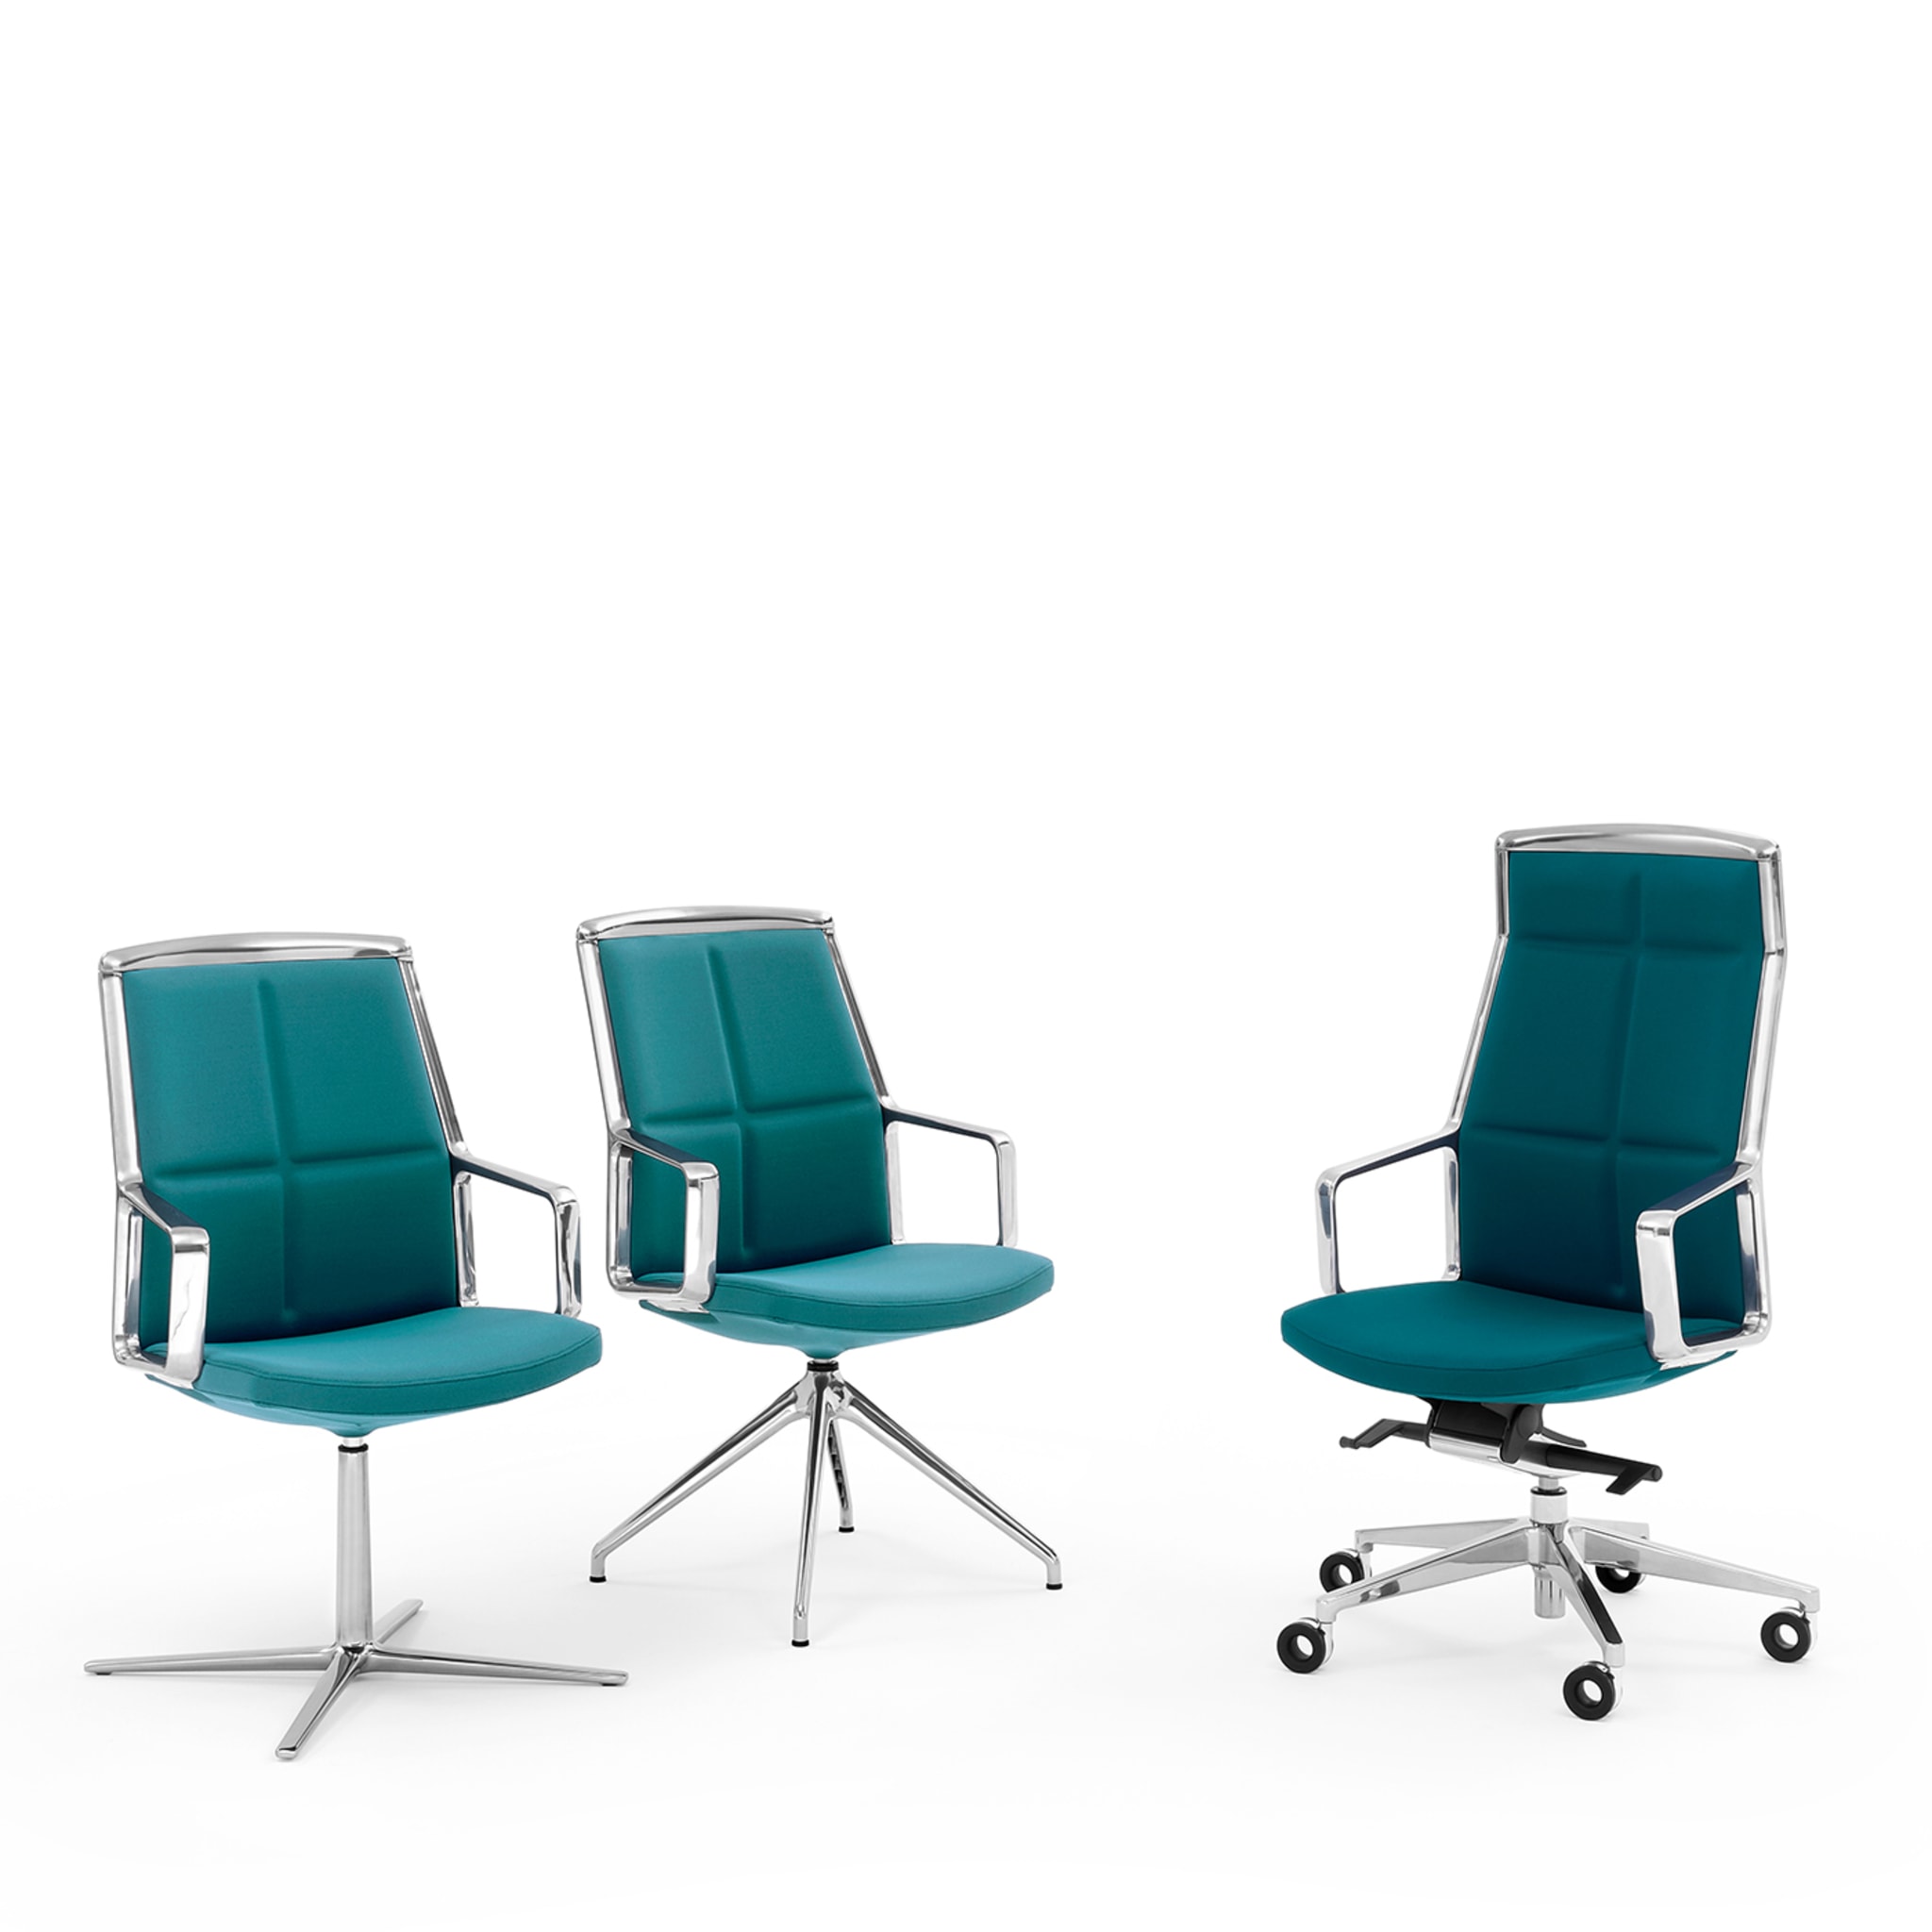 ADELE BLUE-GREEN MEETING CHAIR #2 by ORLANDINIDESIGN - Alternative view 2